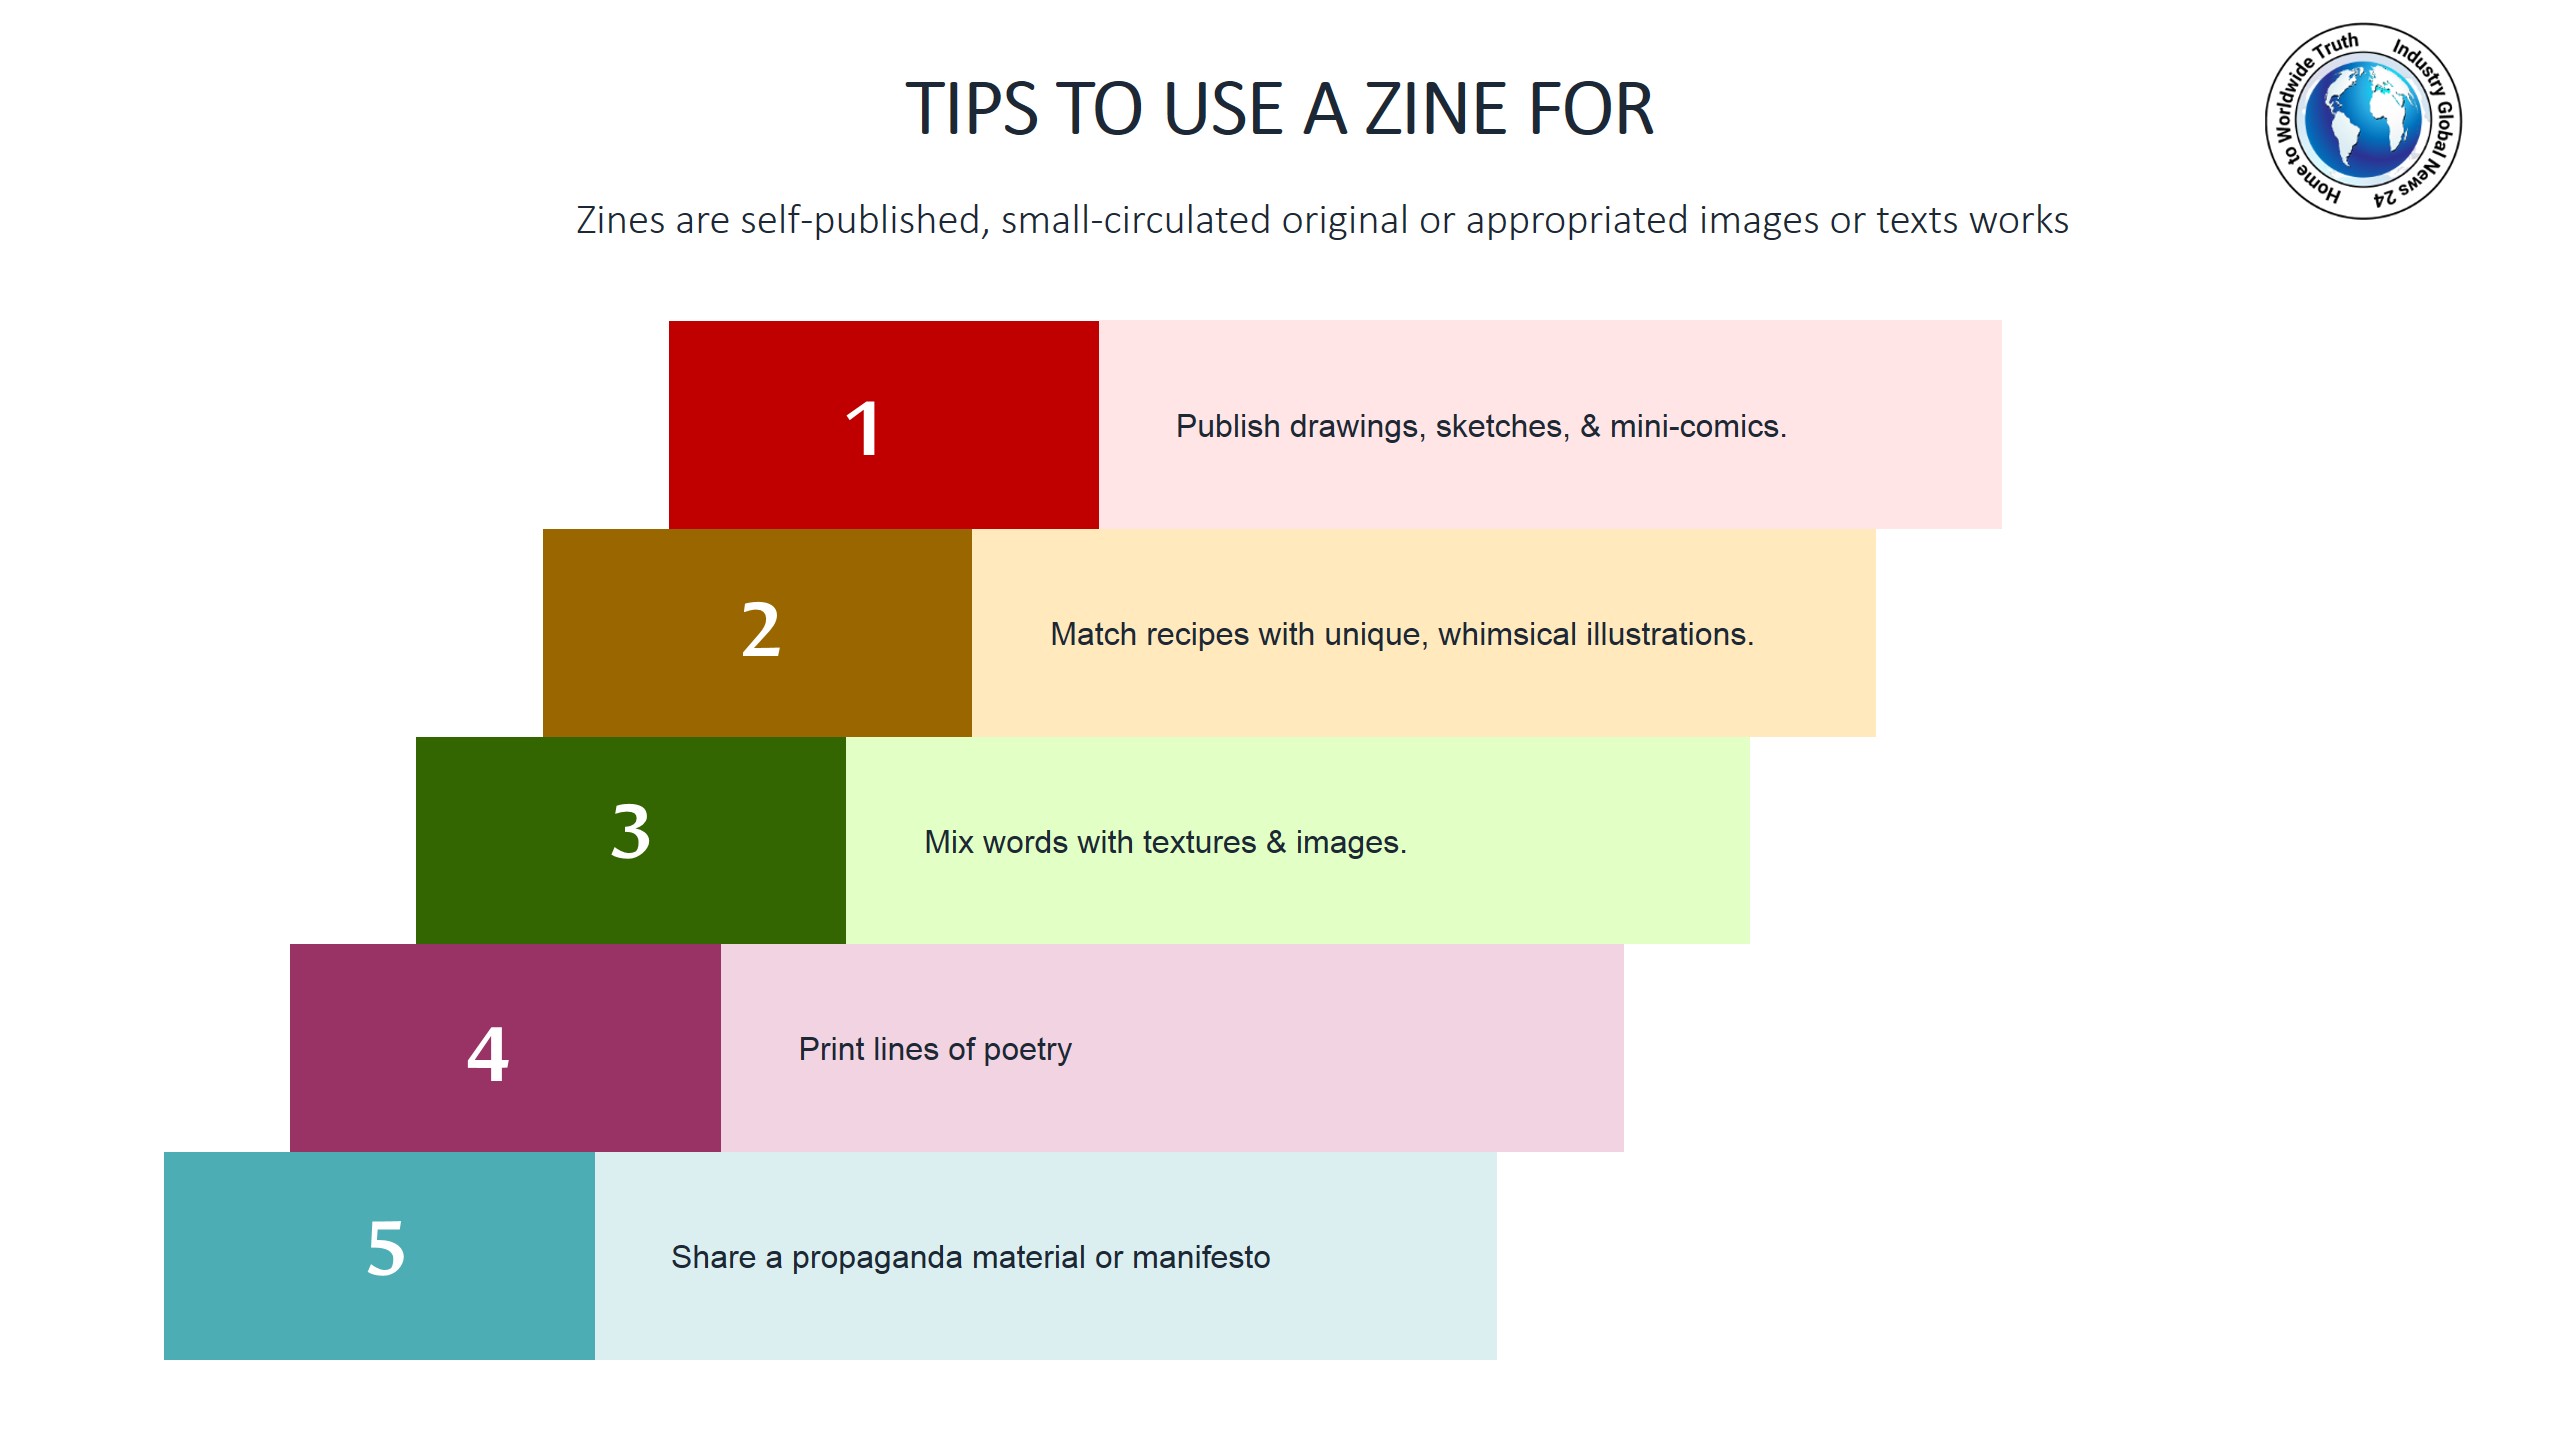 Tips to use a zine for